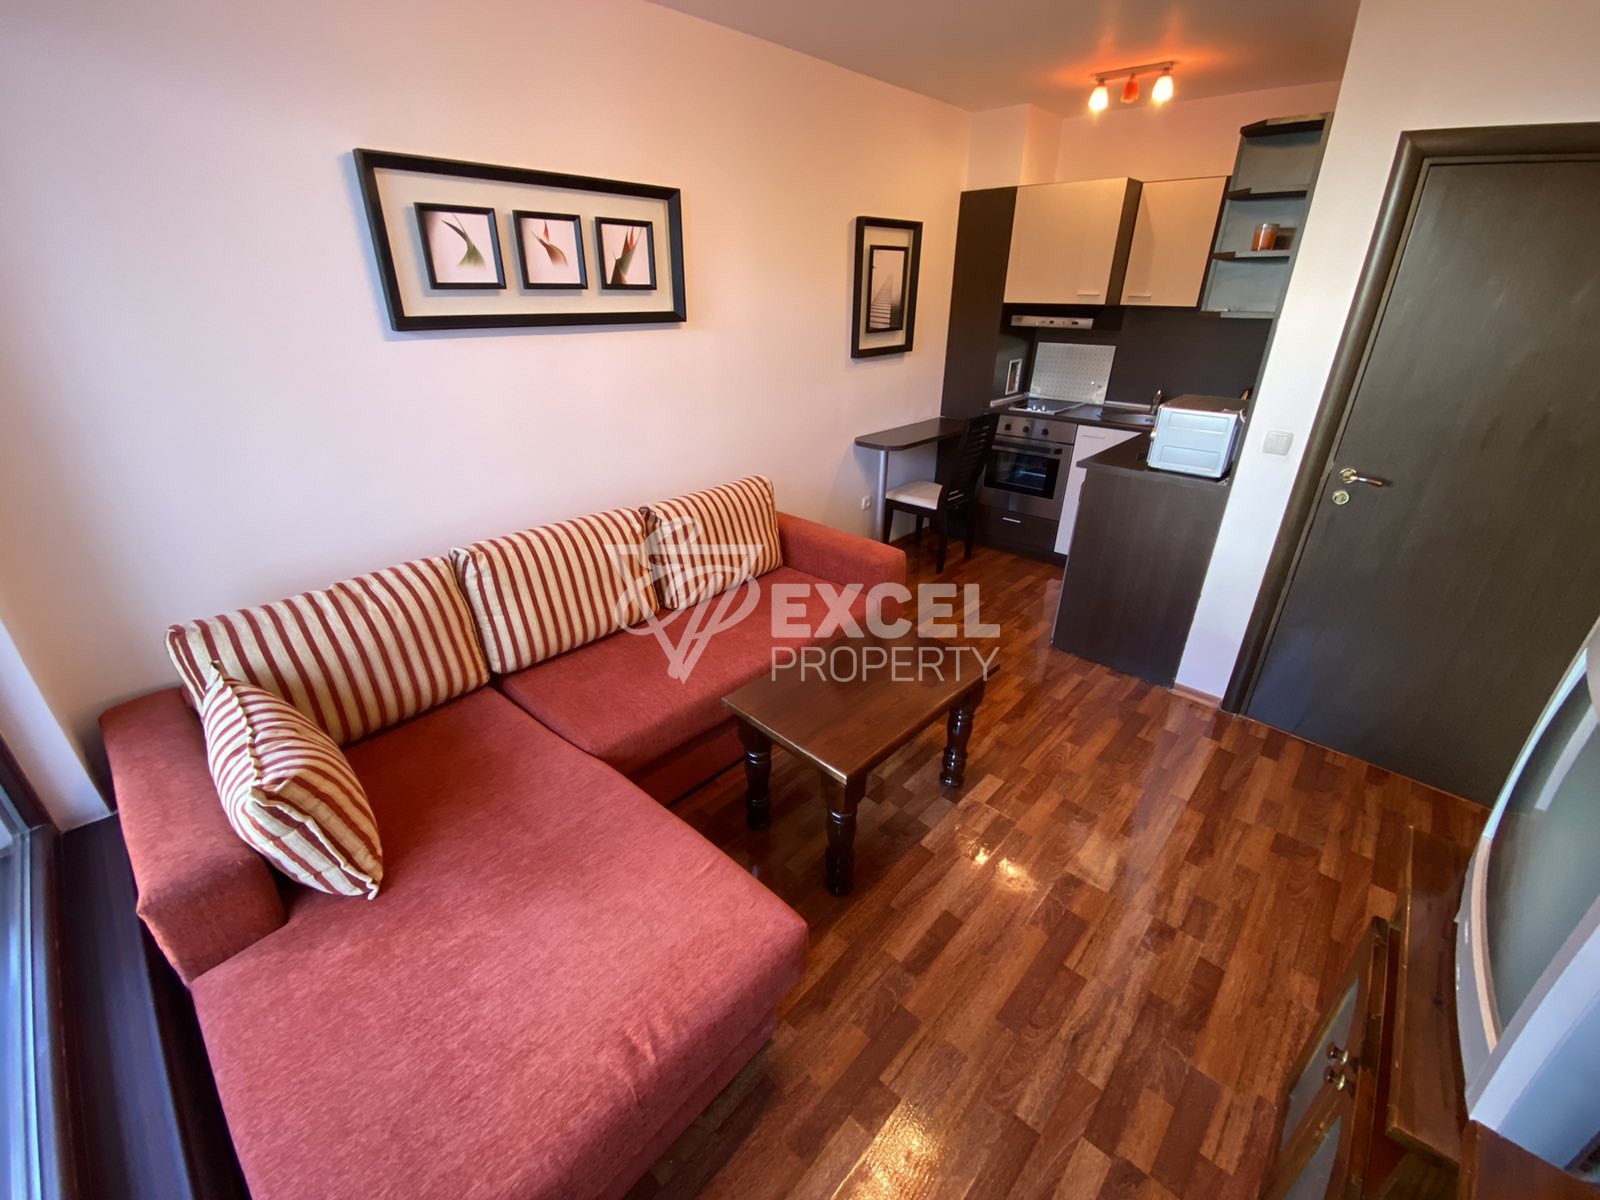 Affordable one-bedroom ground floor apartment in a low maintenance building!